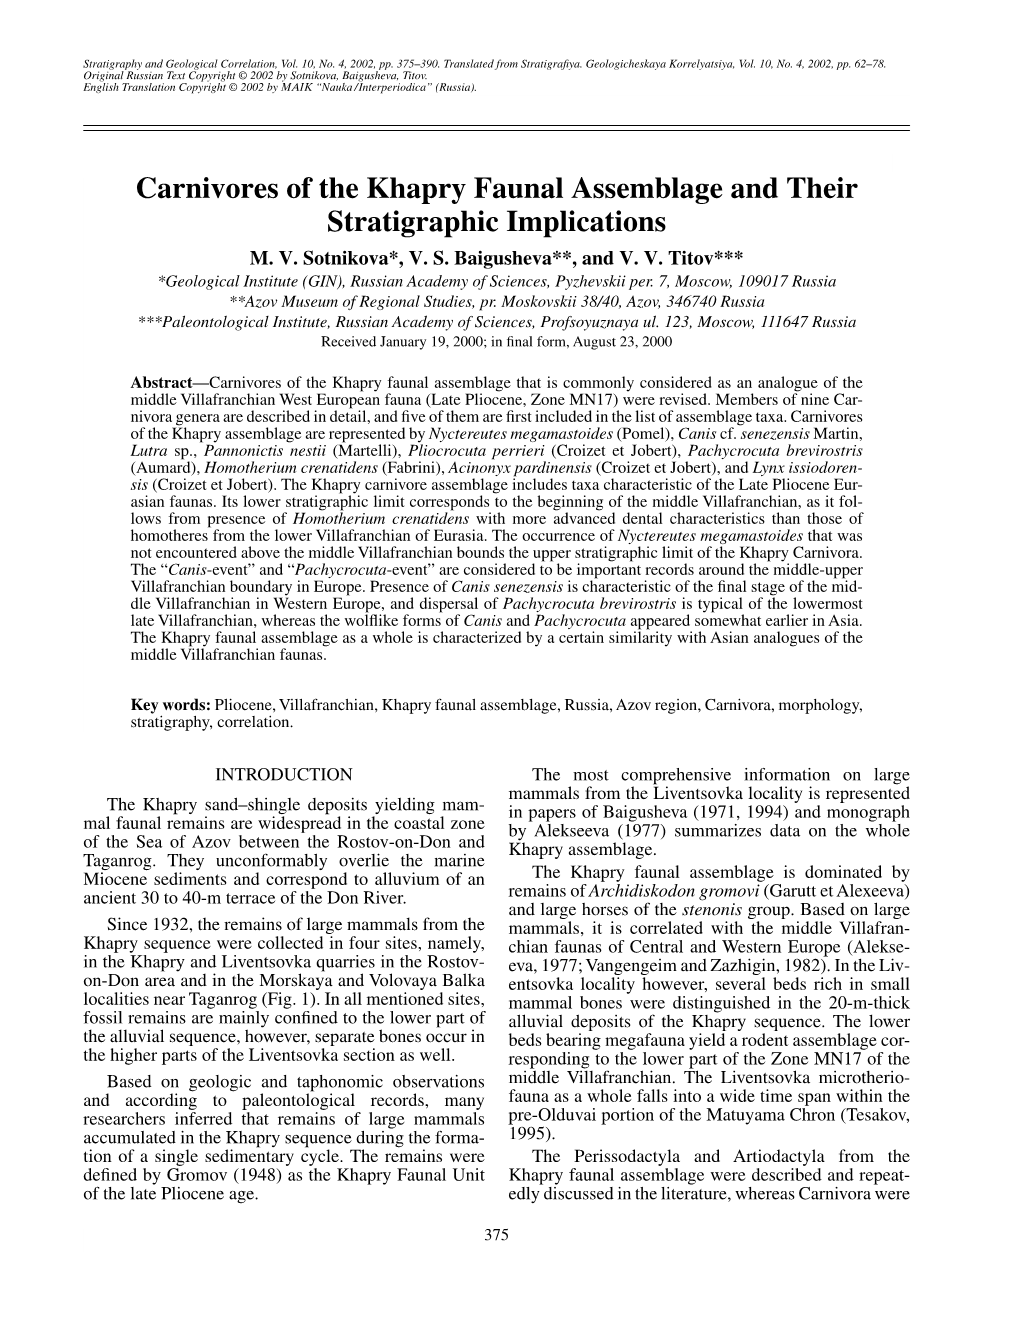 Carnivores of the Khapry Faunal Assemblage and Their Stratigraphic Implications M